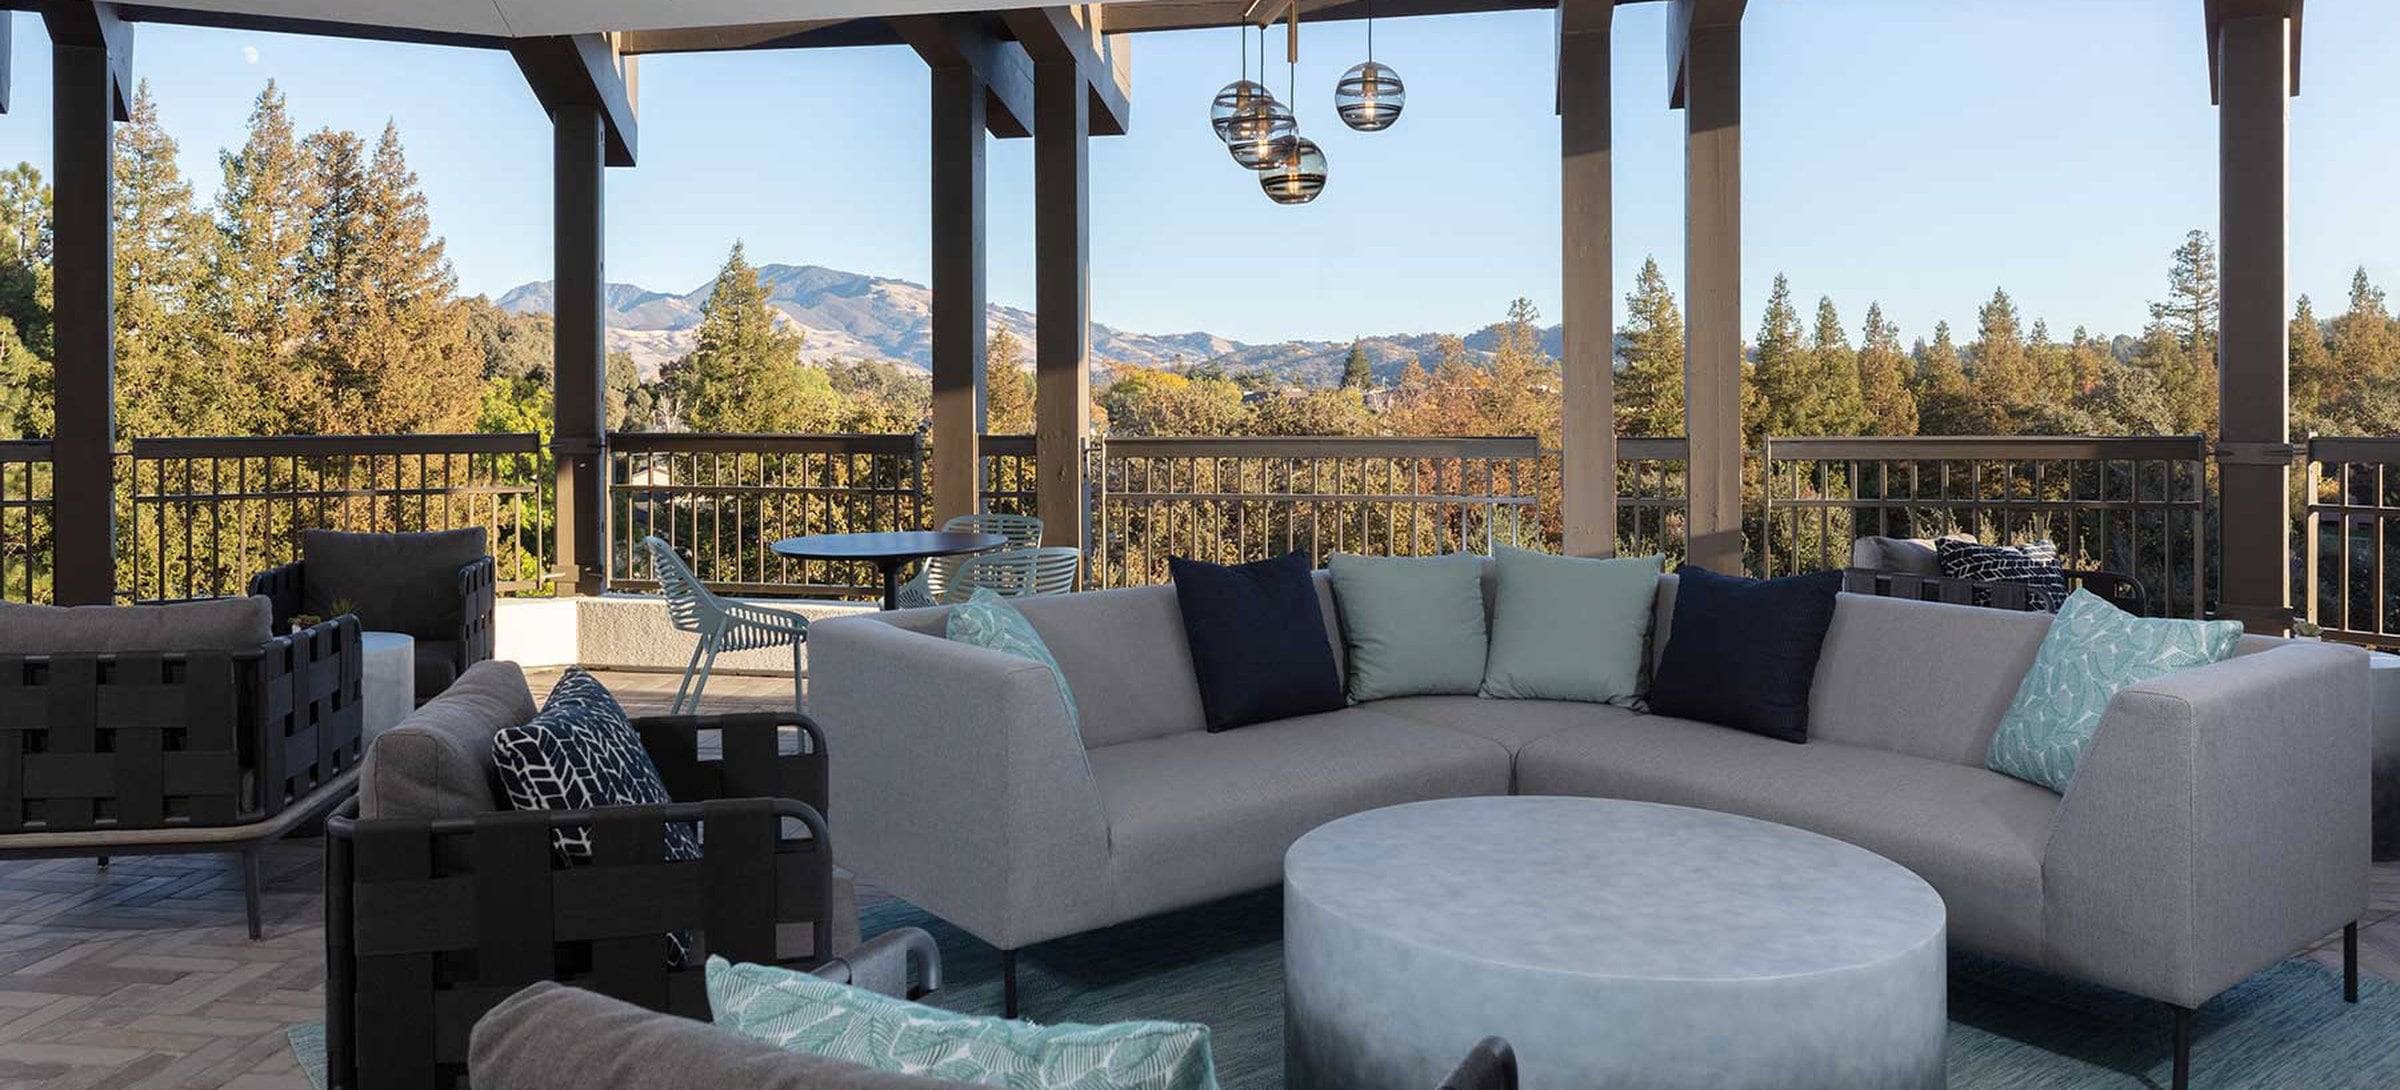 Phase II Rooftop terrace with lounge seating and views of Mount Diablo